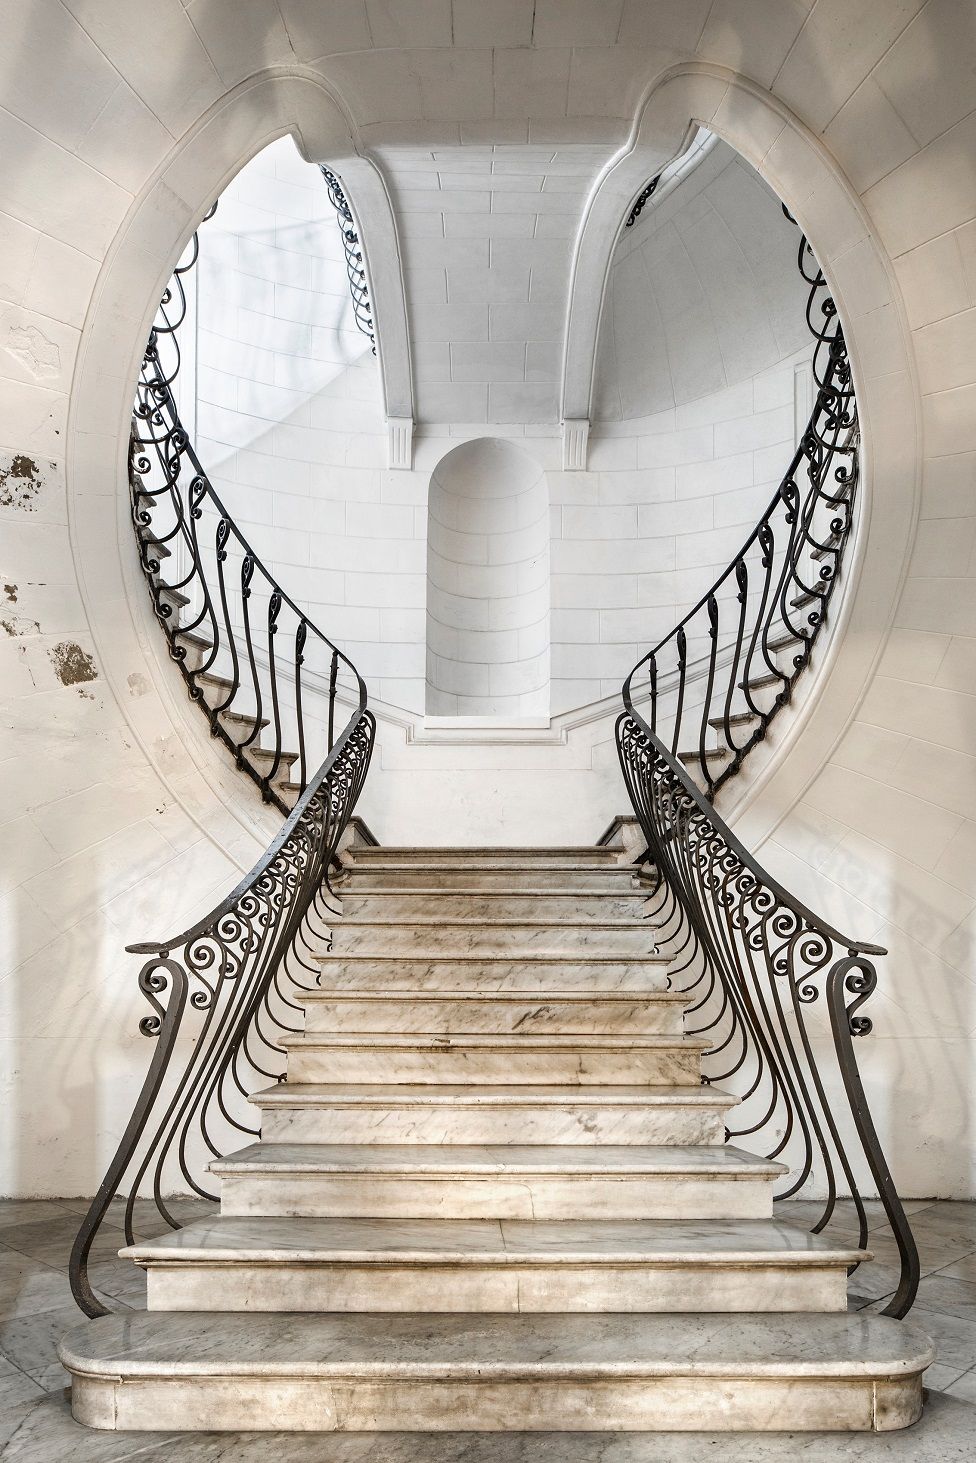 An ornate staircase of white stone and marble